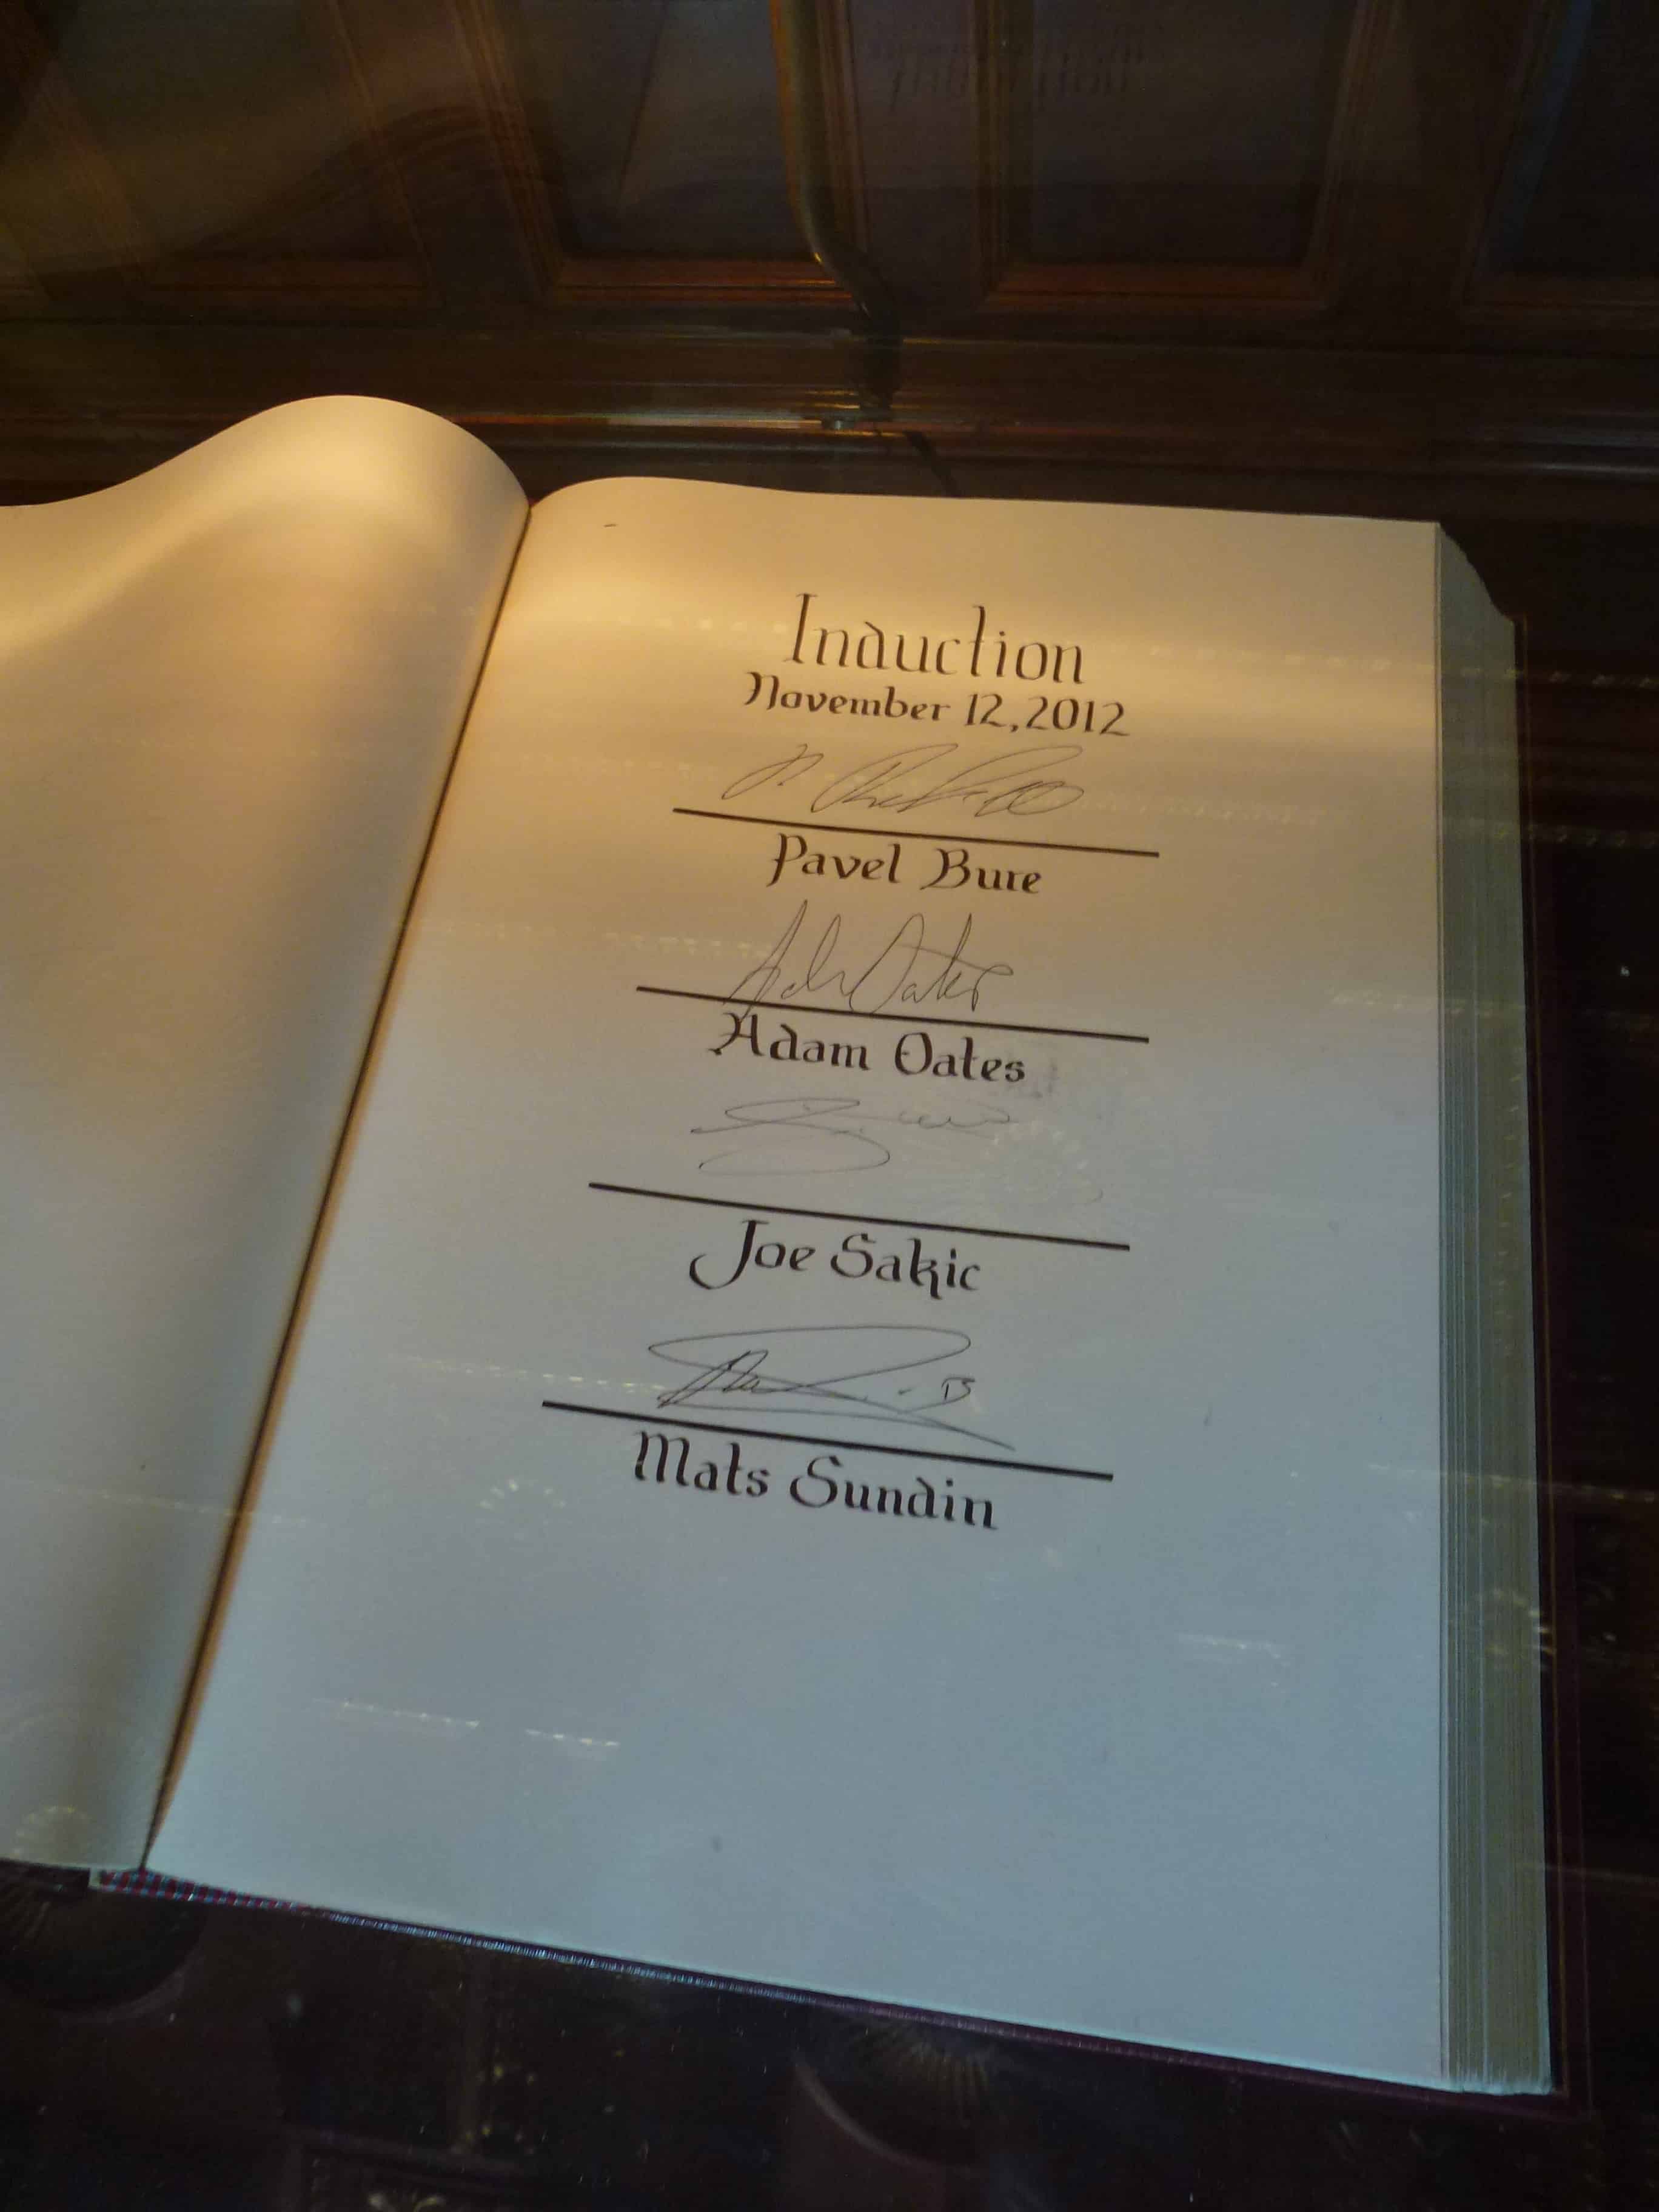 Hockey Hall of Fame induction book at the Hockey Hall of Fame in Toronto, Ontario, Canada